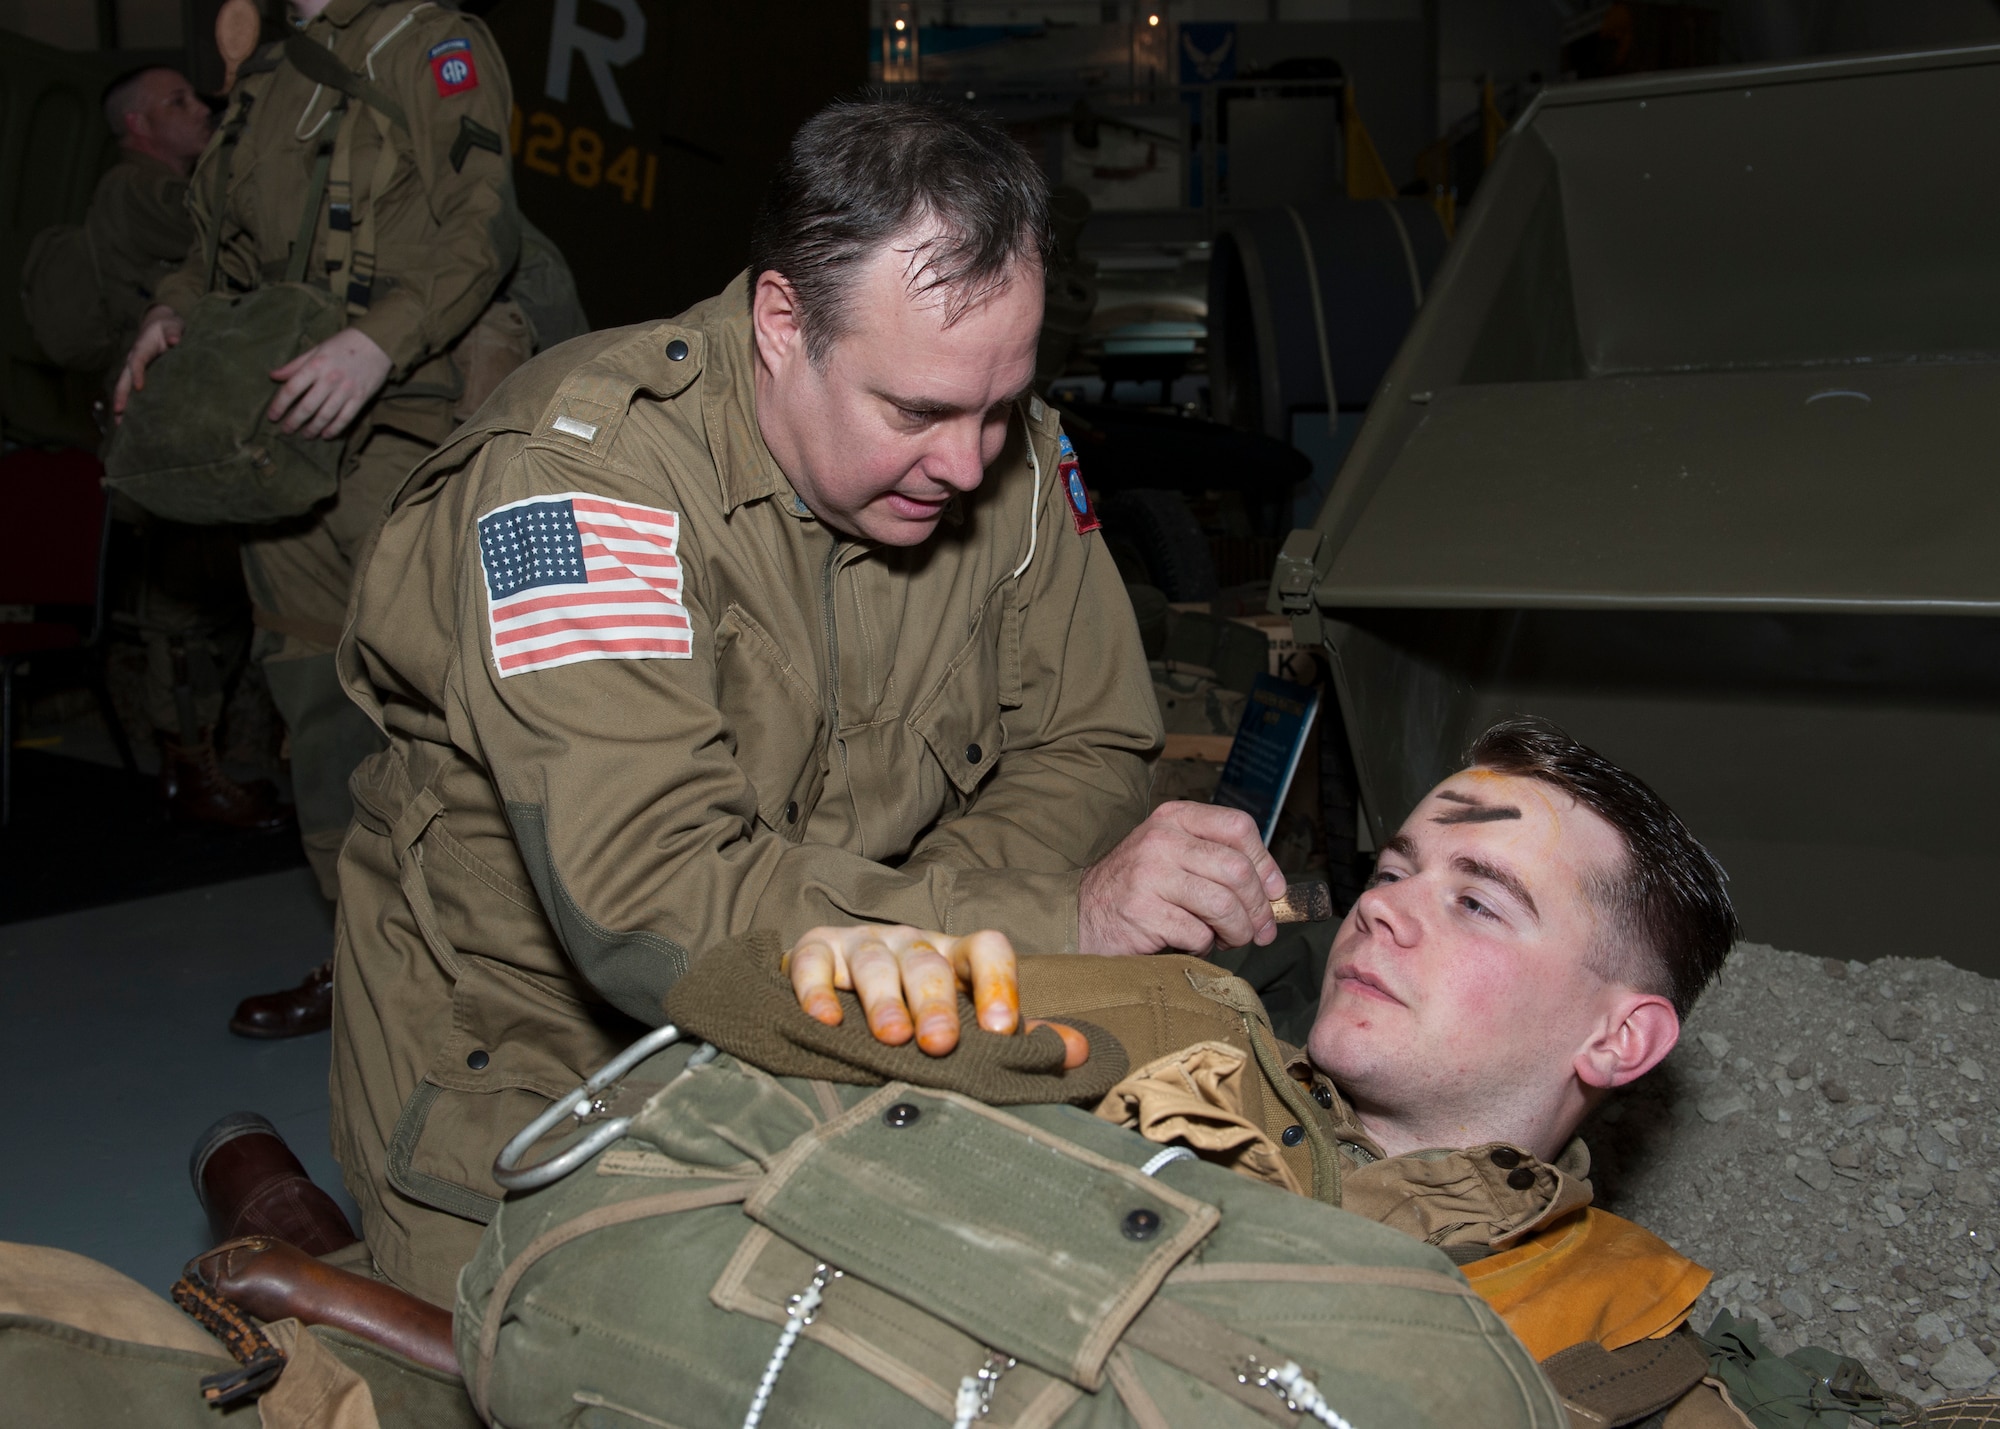 Greg Boyer applies combat face paint to the face of Daniel Dillier April 18, 2015, at the Air Mobility Command Museum near Dover Air Force Base, Del. Boyer and Dillier are members of a re-enacting group that depict World War II-era paratroopers from the 82nd Airborne Division. (U.S. Air Force photo/Airman 1st Class Zachary Cacicia)